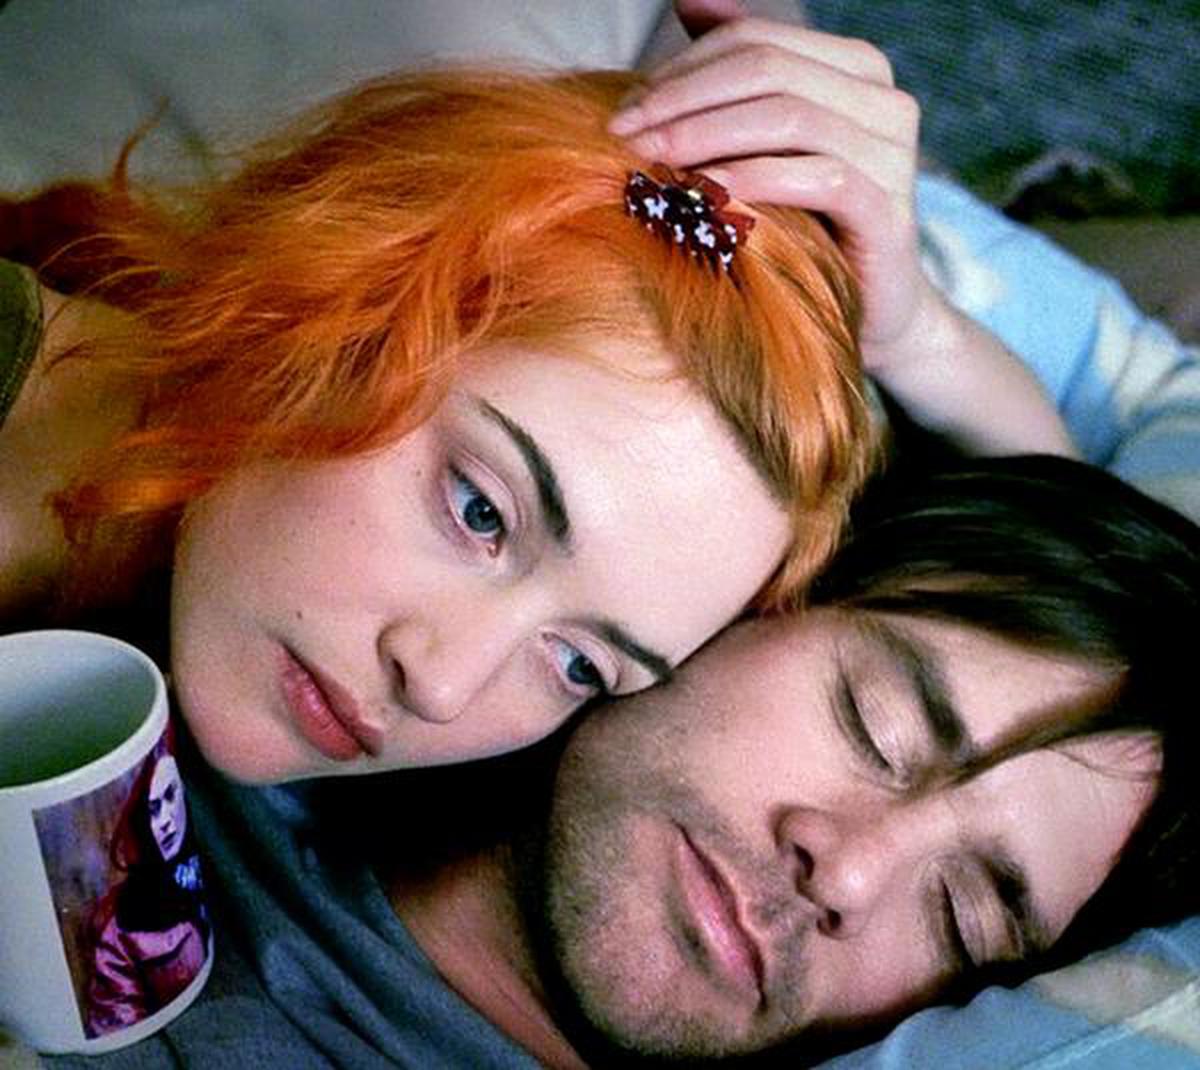 Two of the main characters from "Eternal Sunshine of the Spotless Mind", a movie known for its non-linear storytelling.